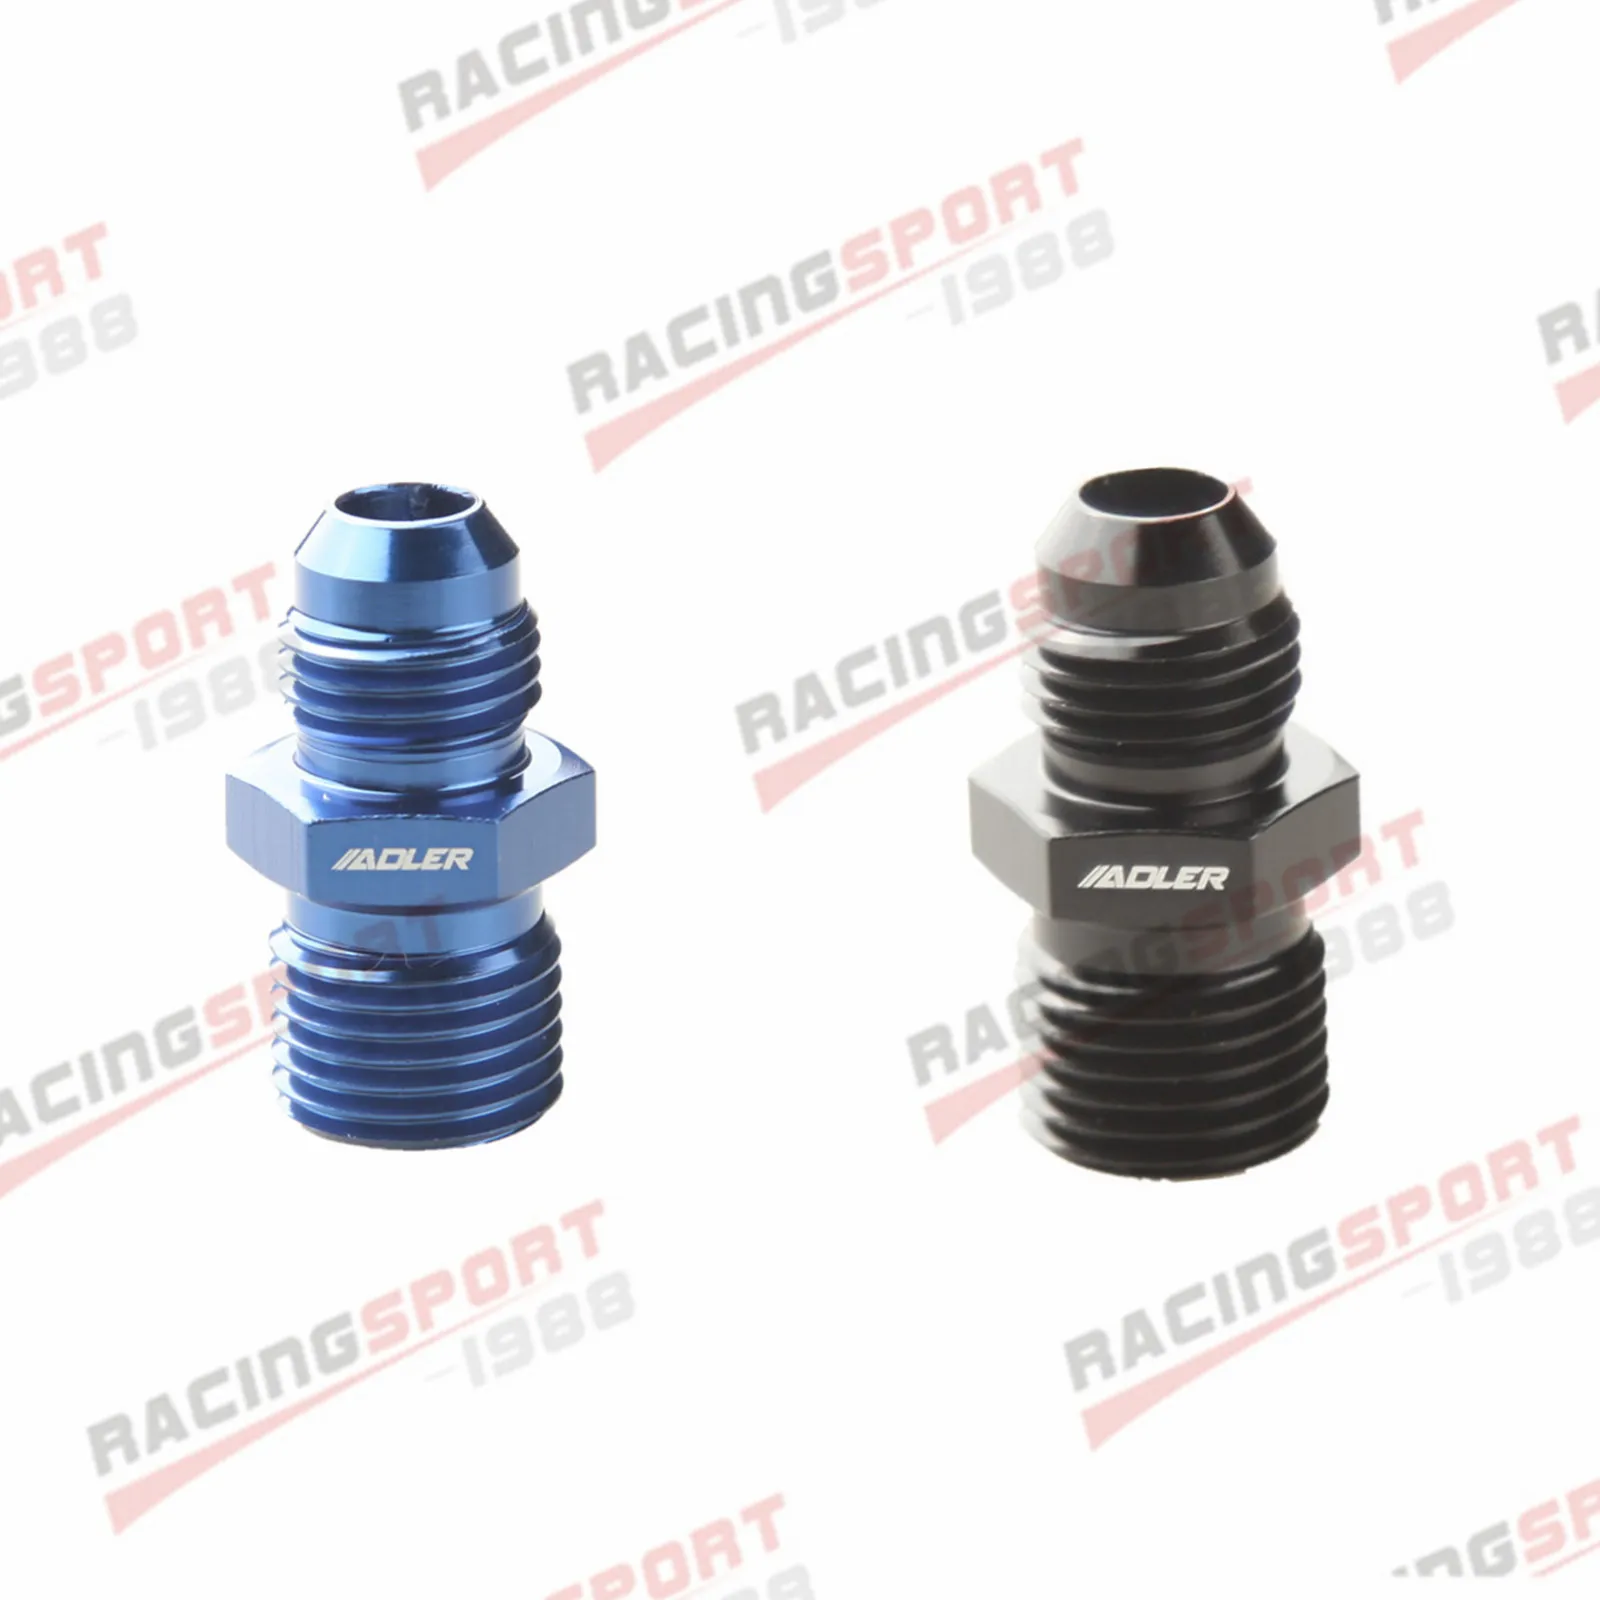 

ADLERSPEED -8 AN 8AN AN8 Male Flare To M14x1.5 Metric Male Straight Fitting Blue/Black